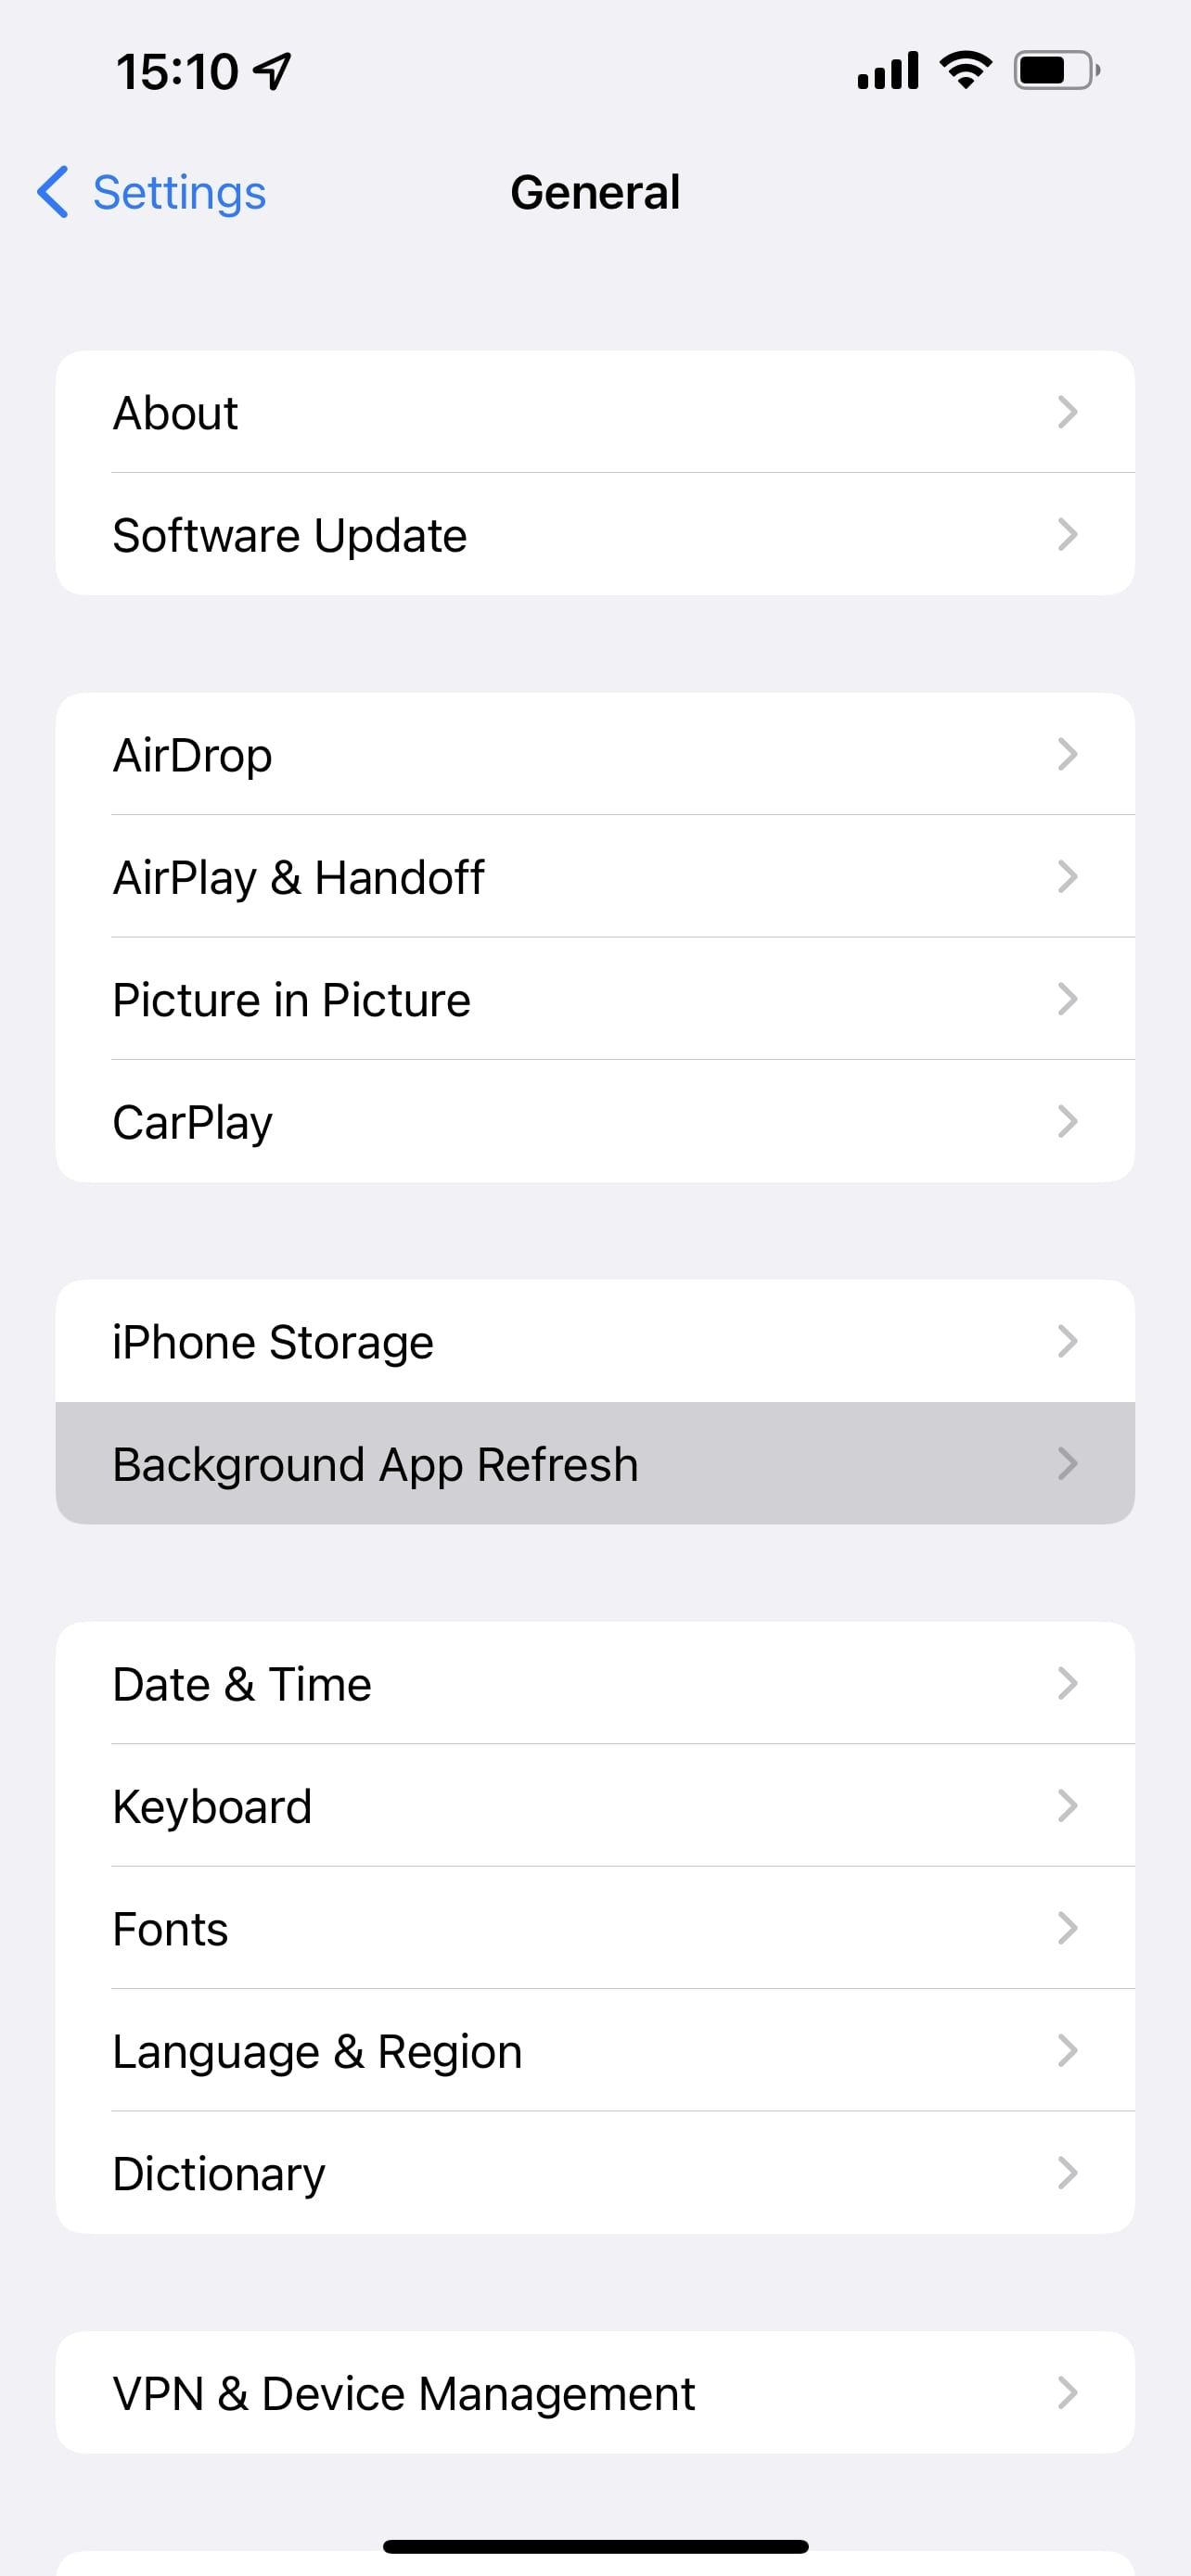 Background App Refresh Highlighted